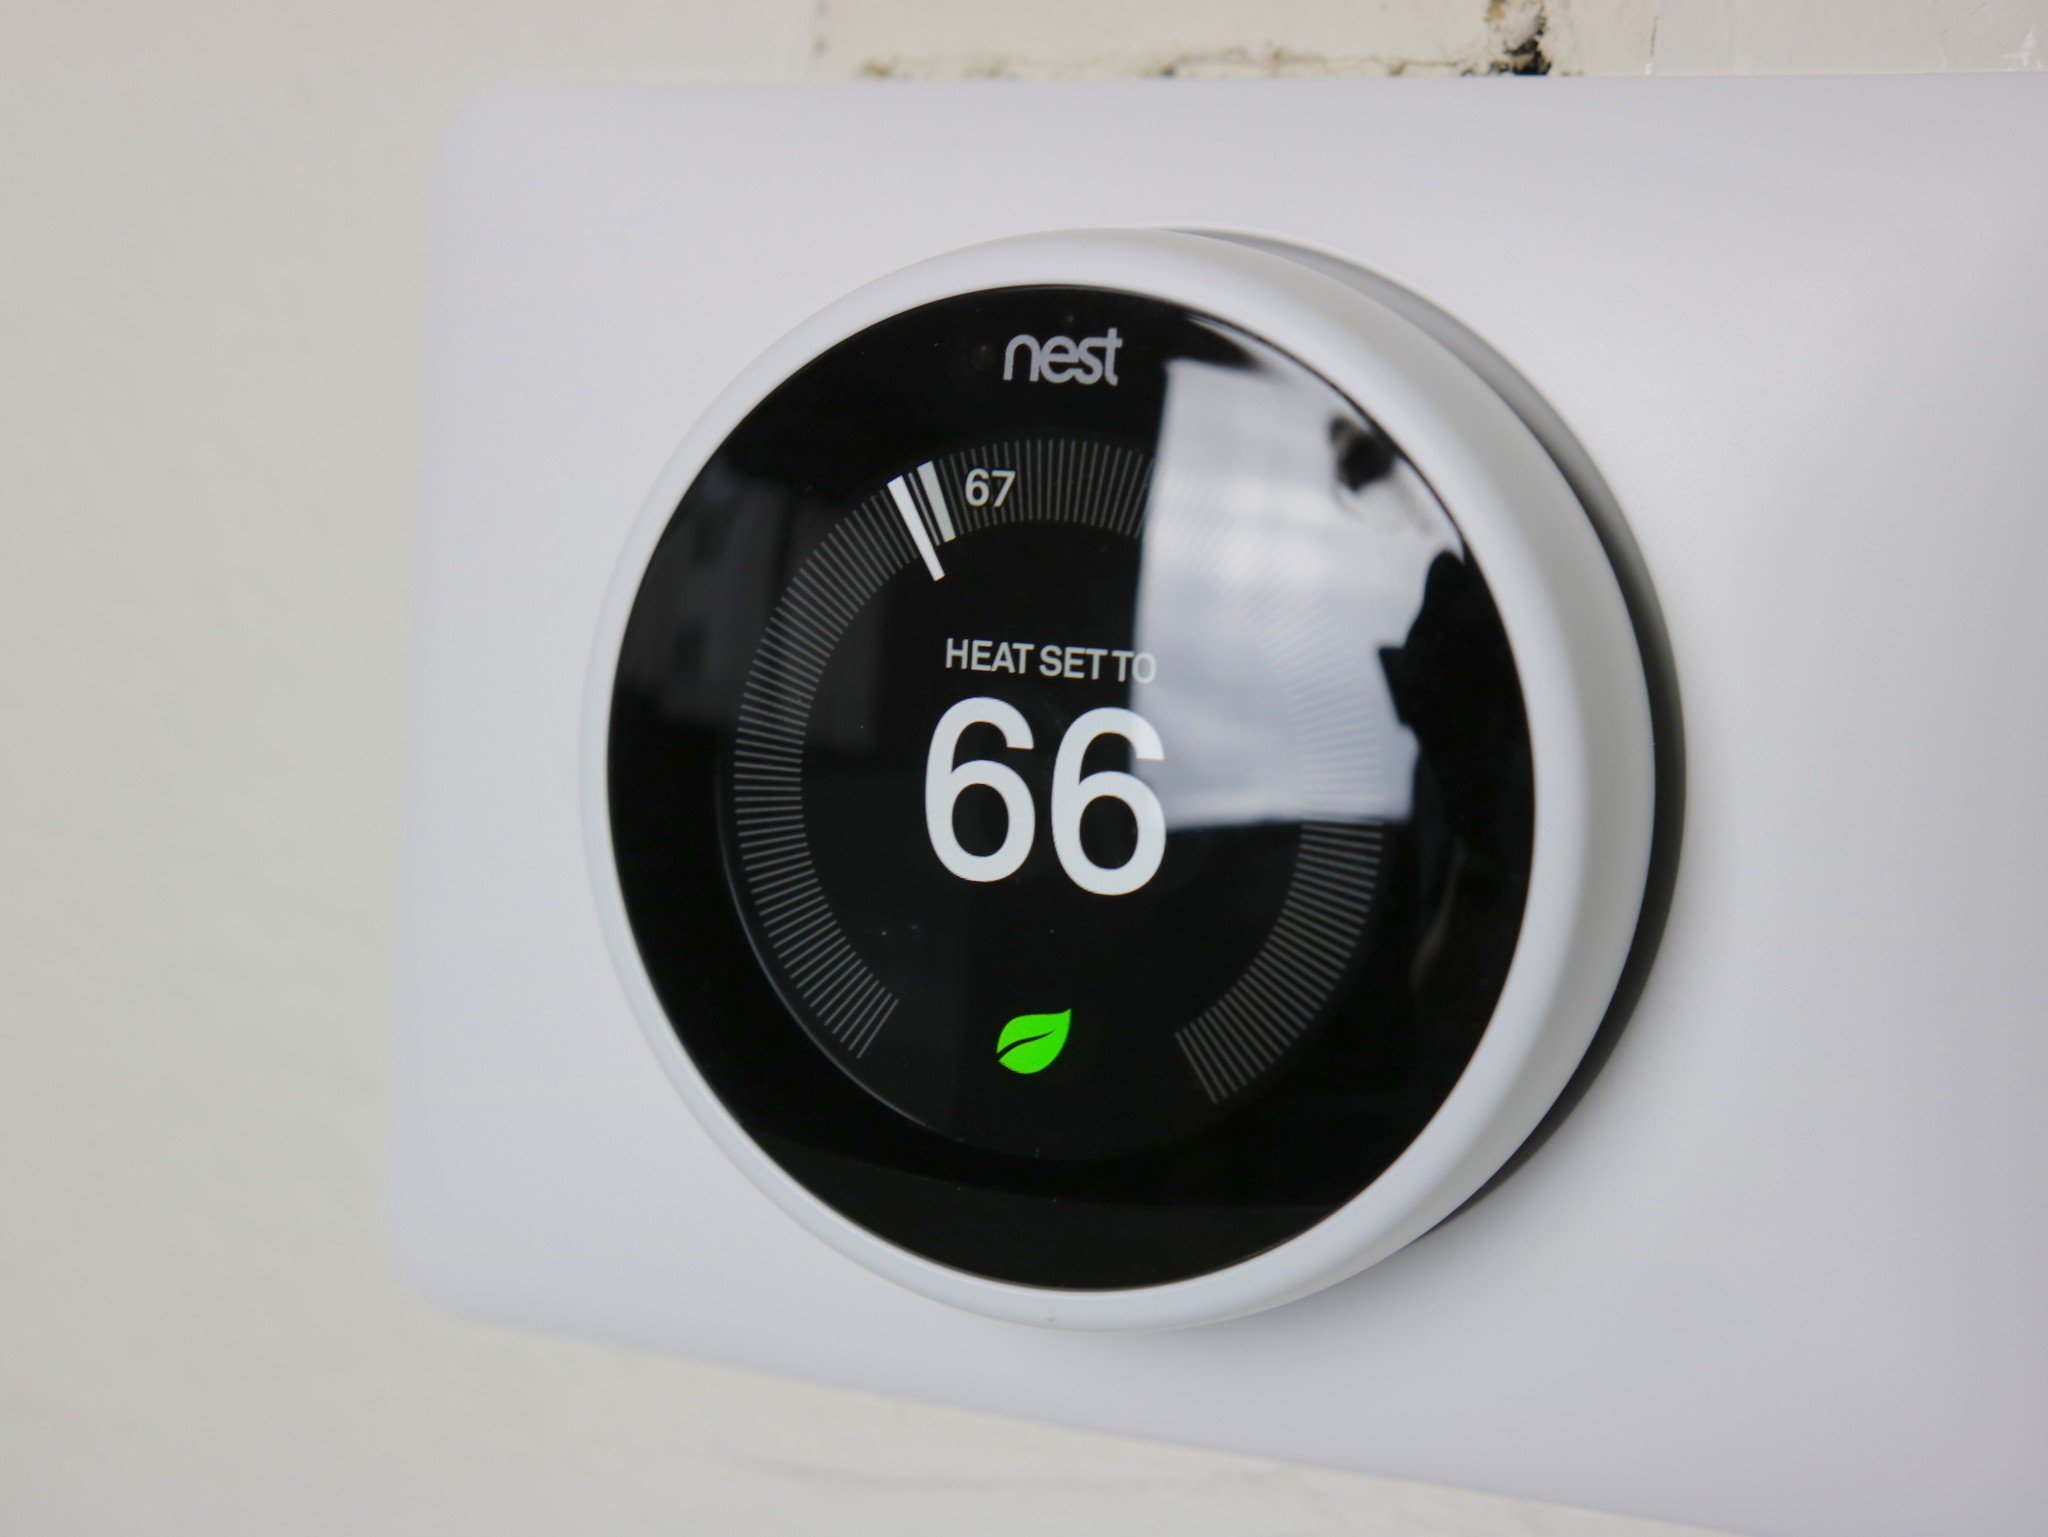 https://www.androidcentral.com/sites/androidcentral.com/files/styles/larger_wm_brw/public/article_images/2019/01/nest-learning-thermostat-3rd-gen-joe-2.jpg